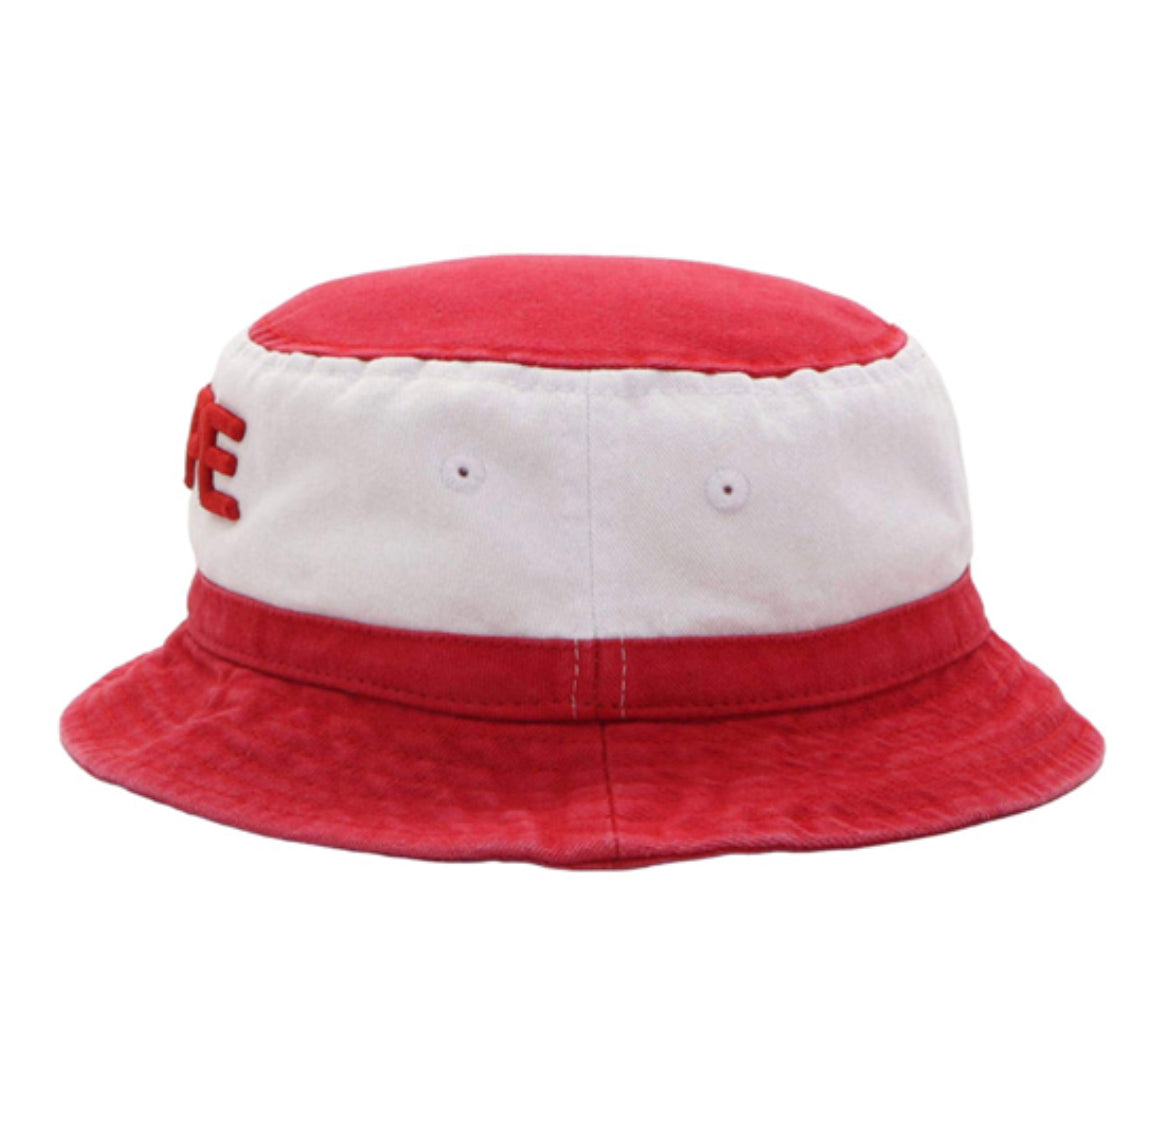 The hat features the recognizable Kappa Alpha Psi "NUPE" logo, making it a must-have for all members. Whether you're out in the sun or just want to add some flair to your outfit, this bucket hat is the perfect accessory. Get yours today and show off your Greek pride!